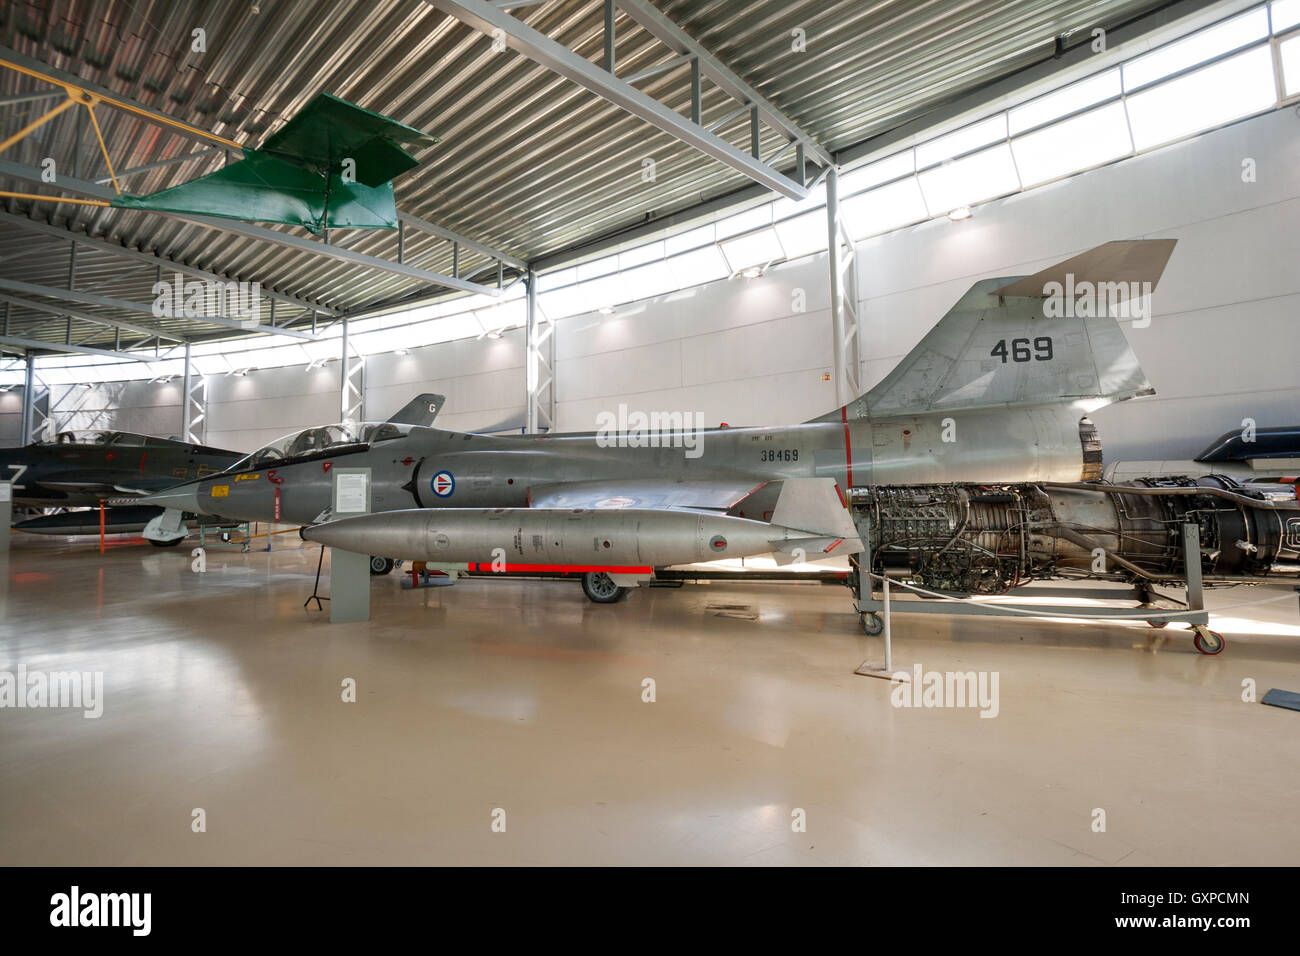 Norwegian Air Force F-104 Starfighter on display in the Aviation museum of Oslo-Gardermoen airport Stock Photo